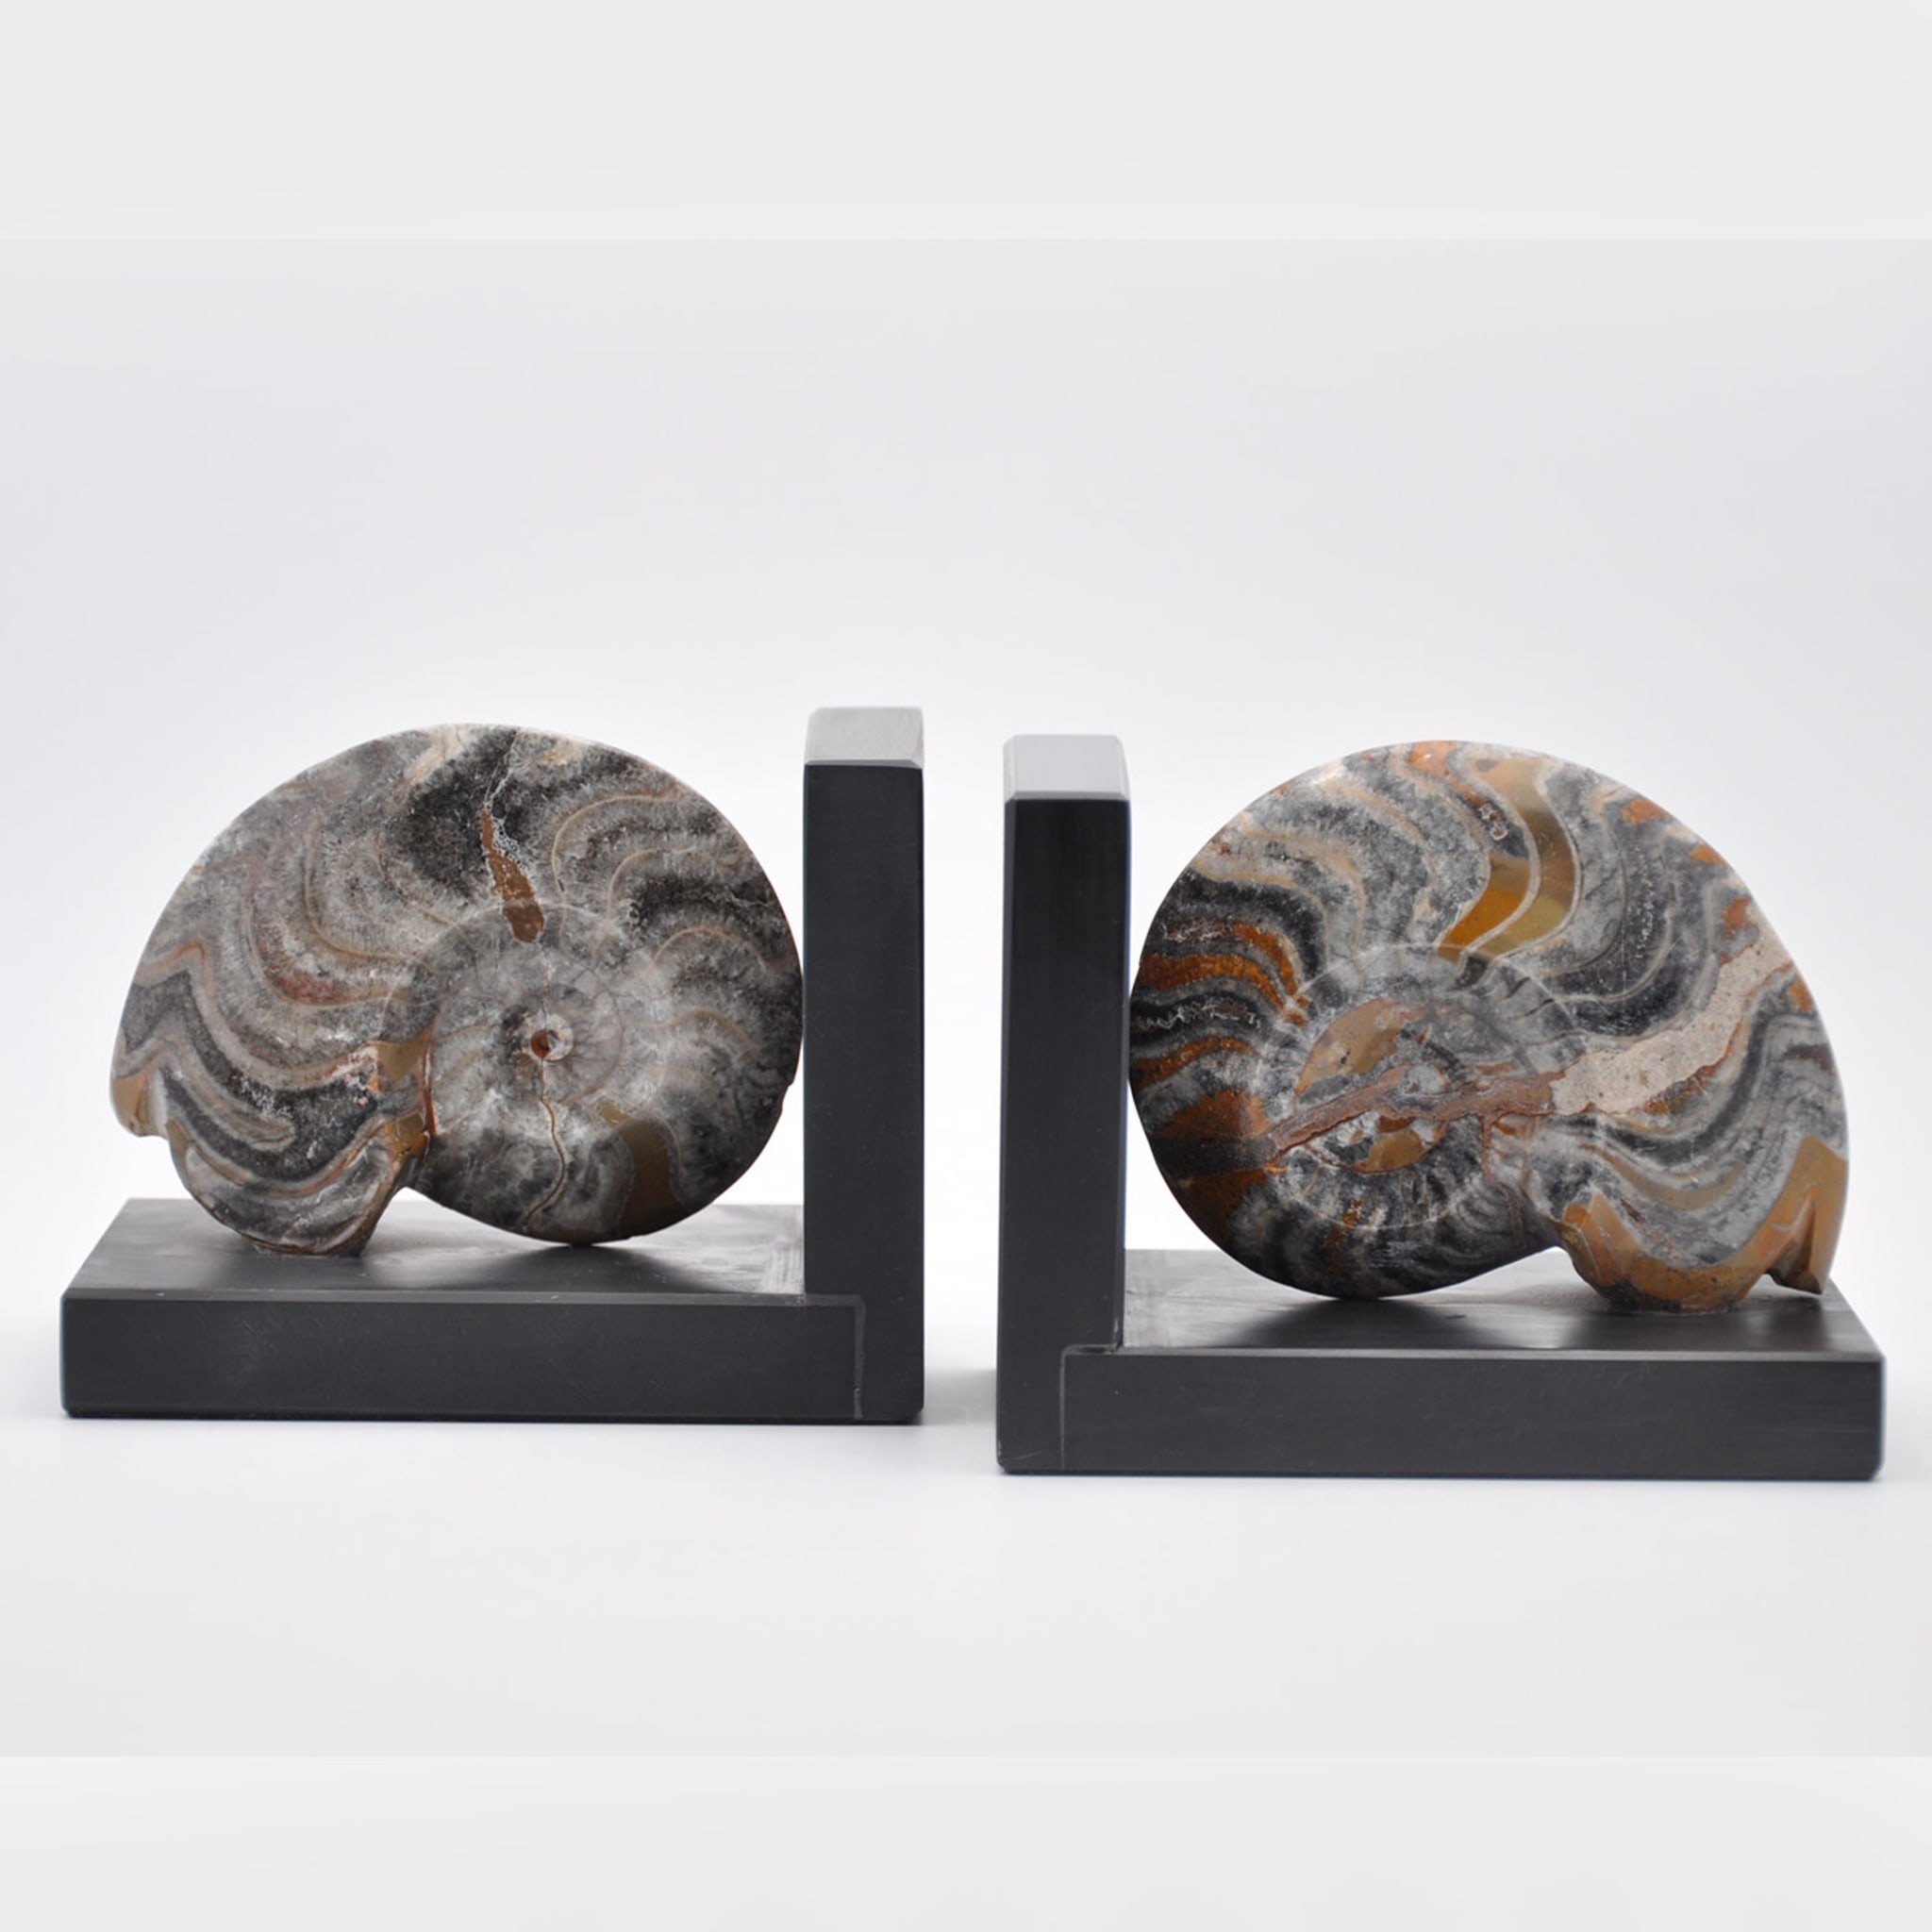 Fossiline Bookends sculpture #3 by Nino Basso - Alternative view 1